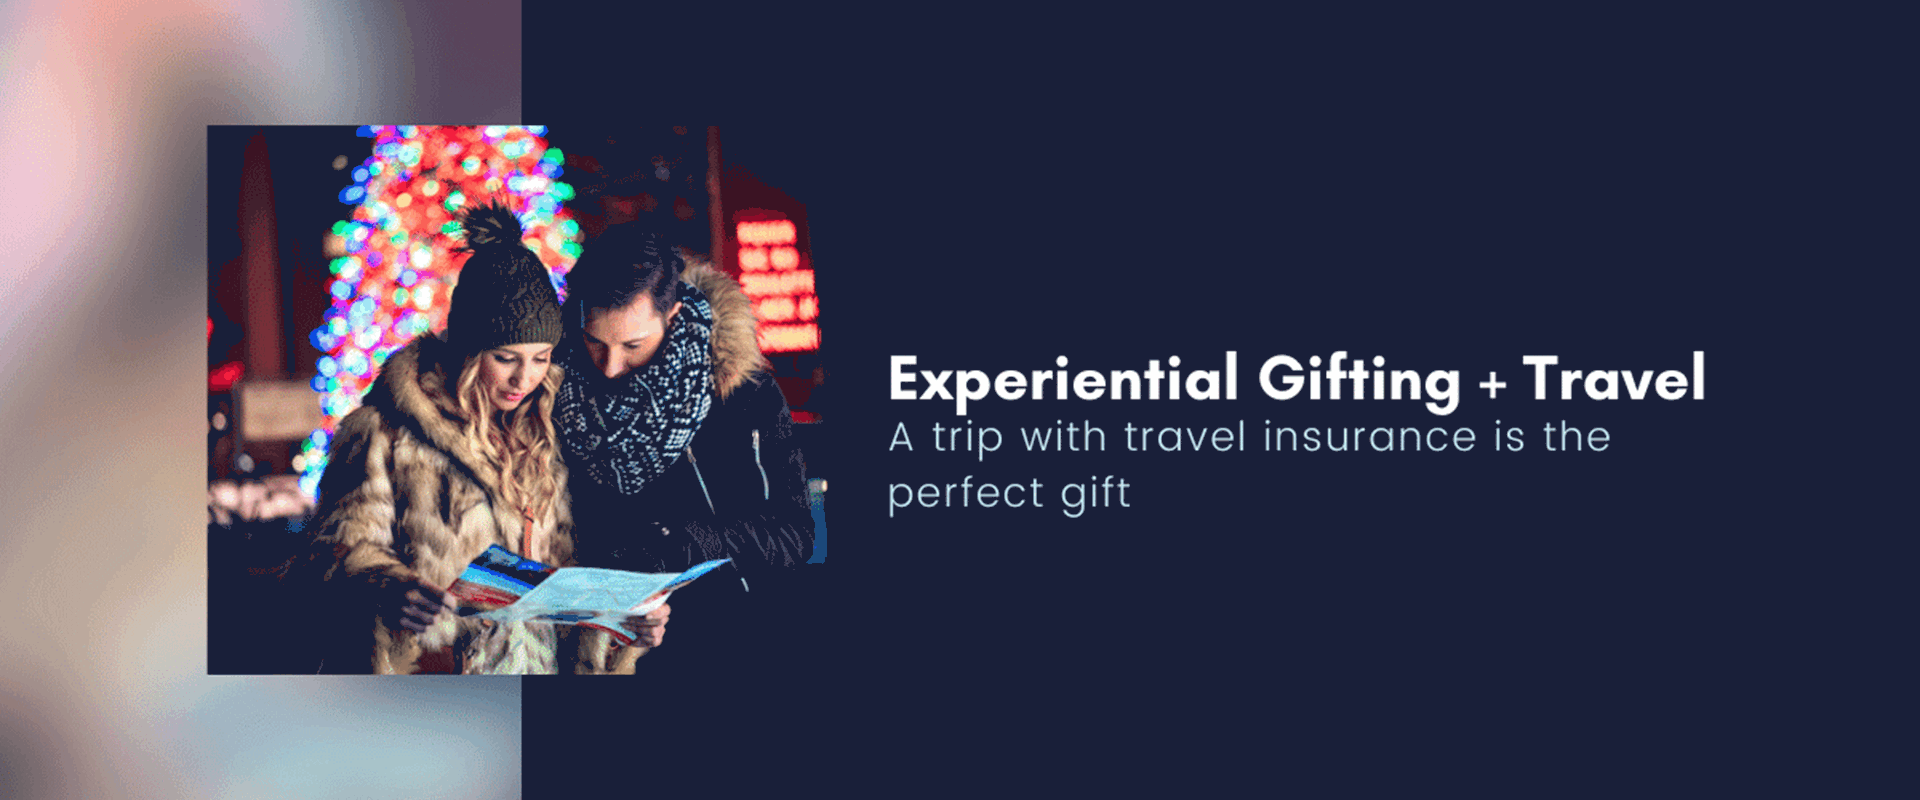 Experience + Travel = The Perfect Gift